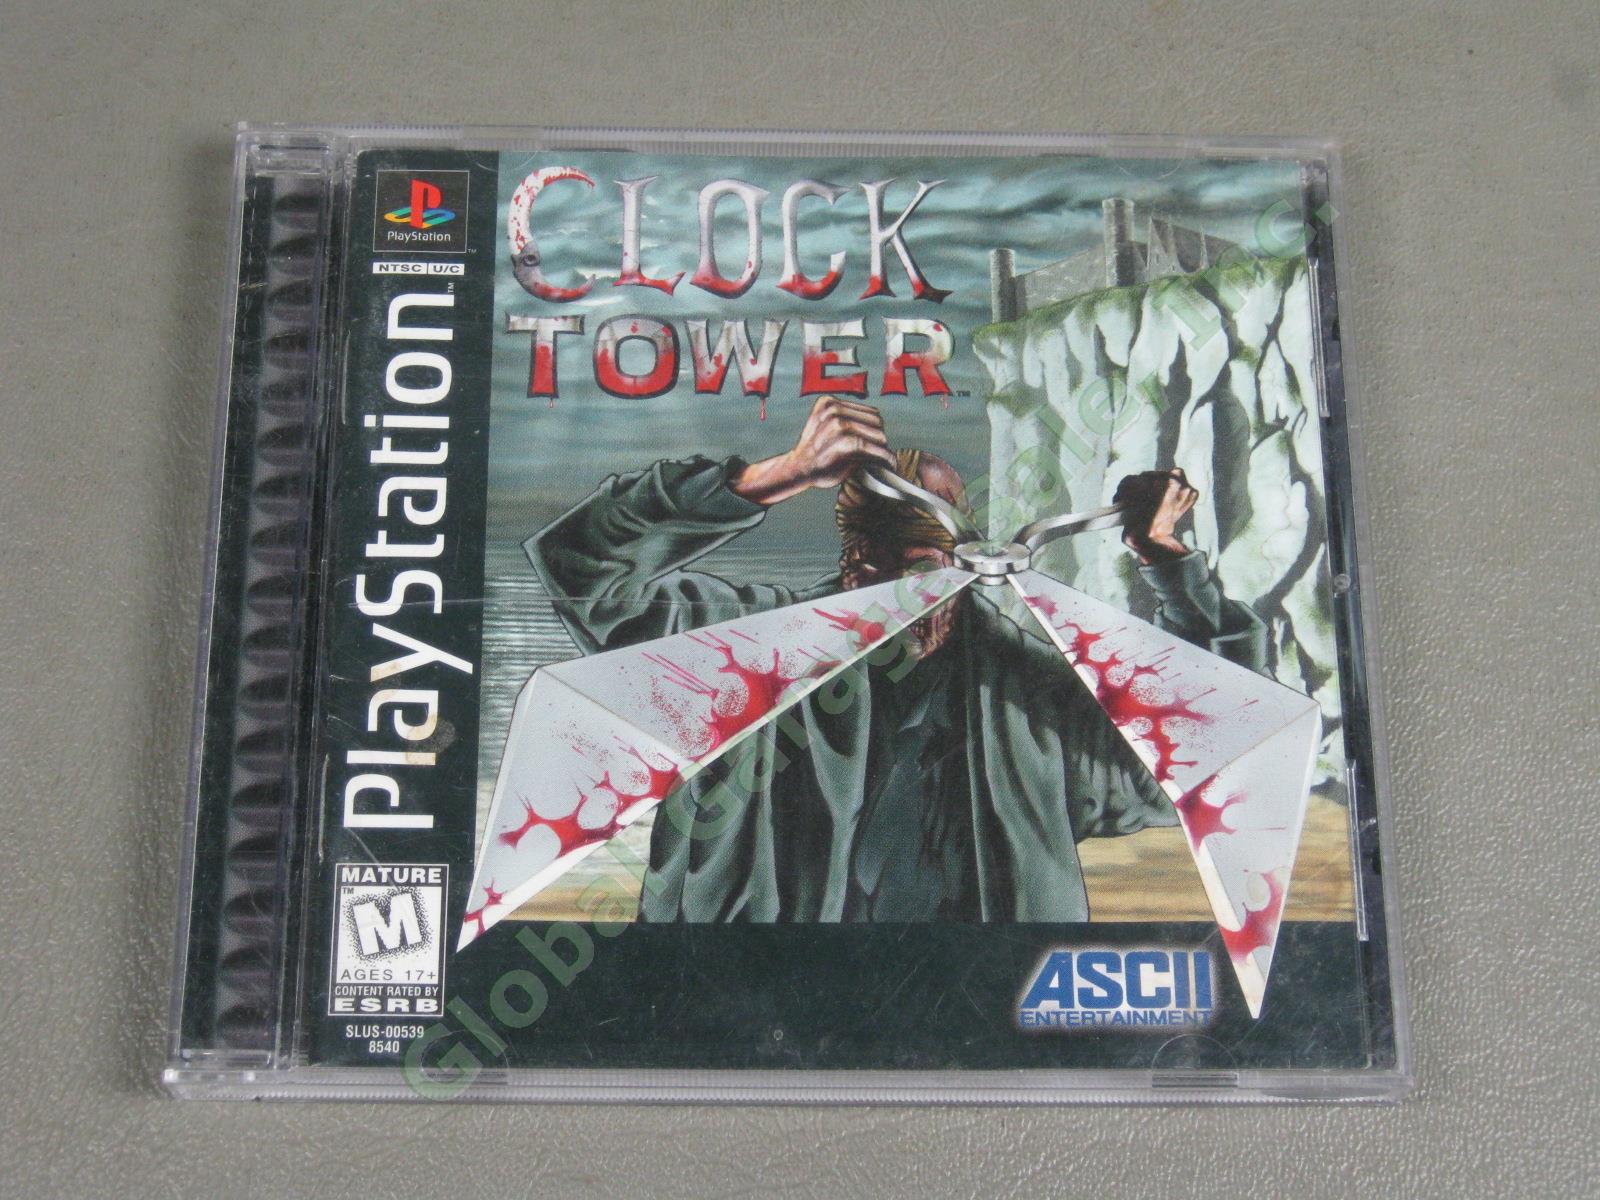 Sony Playstation 1 PS1 PSX PSOne Black Label BL Game Clock Tower Complete CIB NR